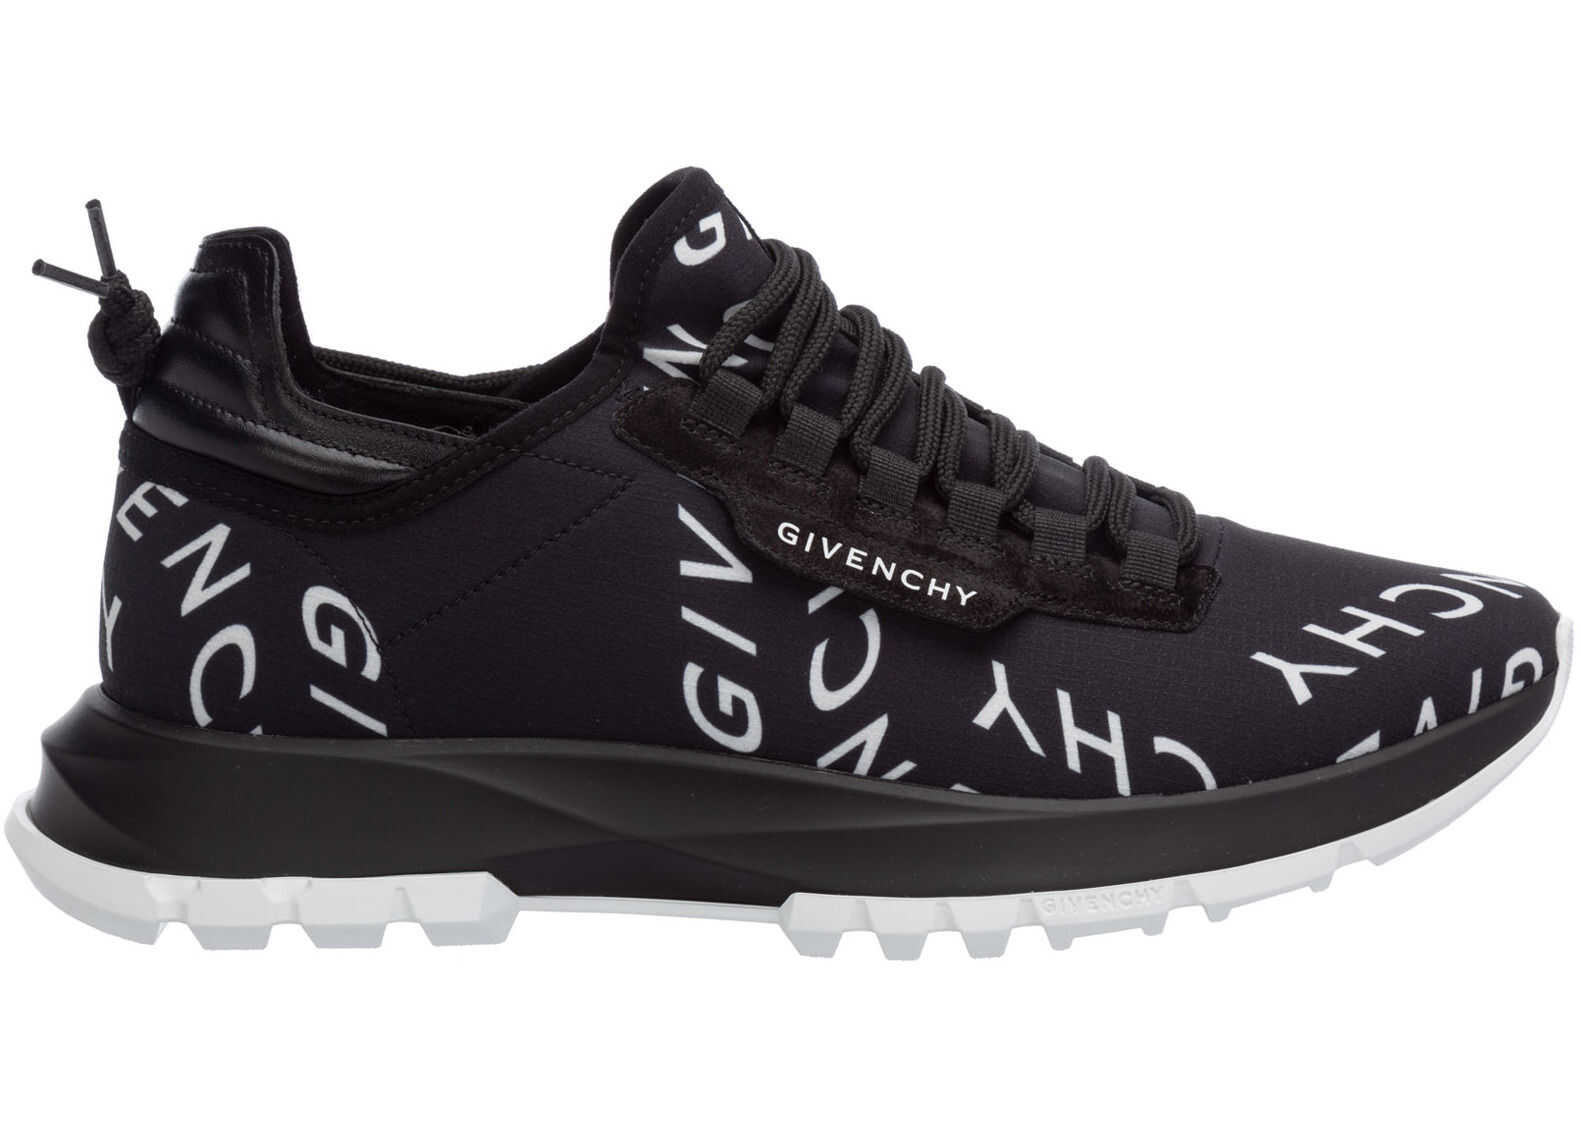 Givenchy Sneakers Spectre Black